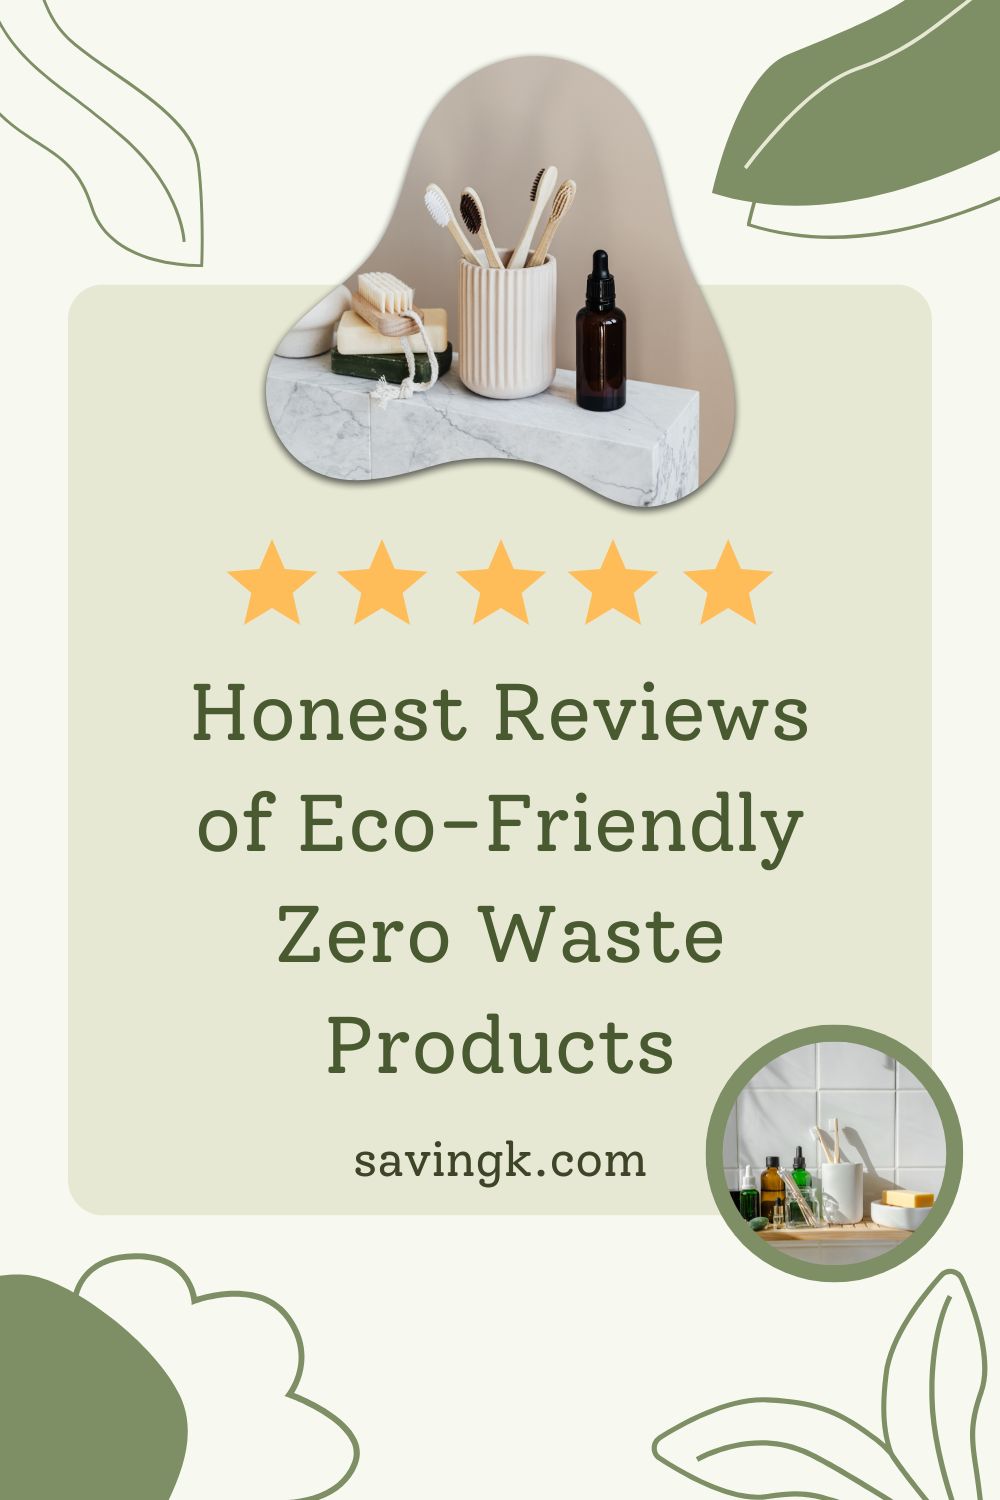 Honest Reviews of Eco-Friendly Zero Waste Products